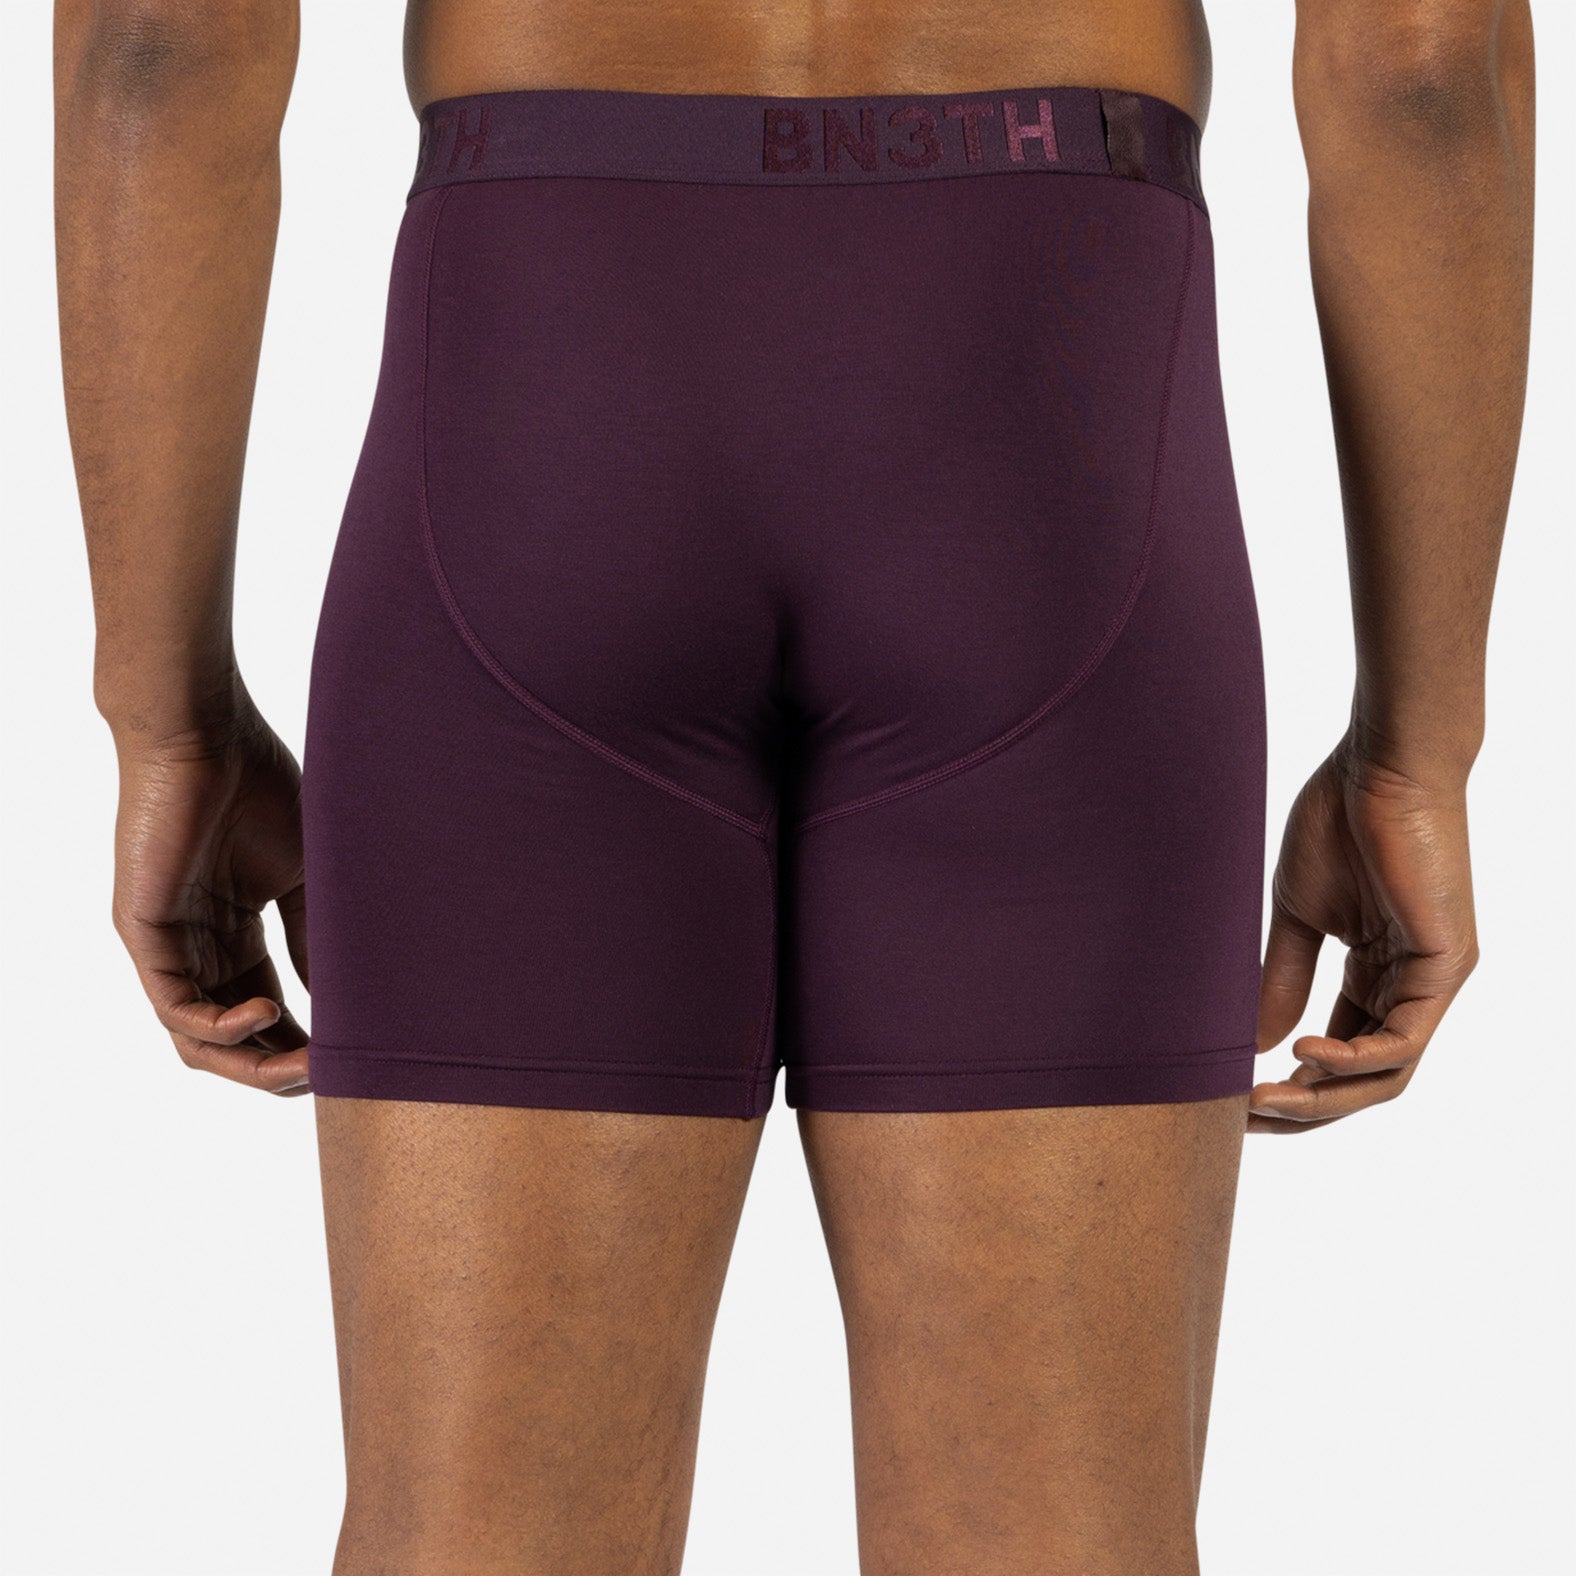 BN3TH brings comfort, sustainability to men's underwear for golfers